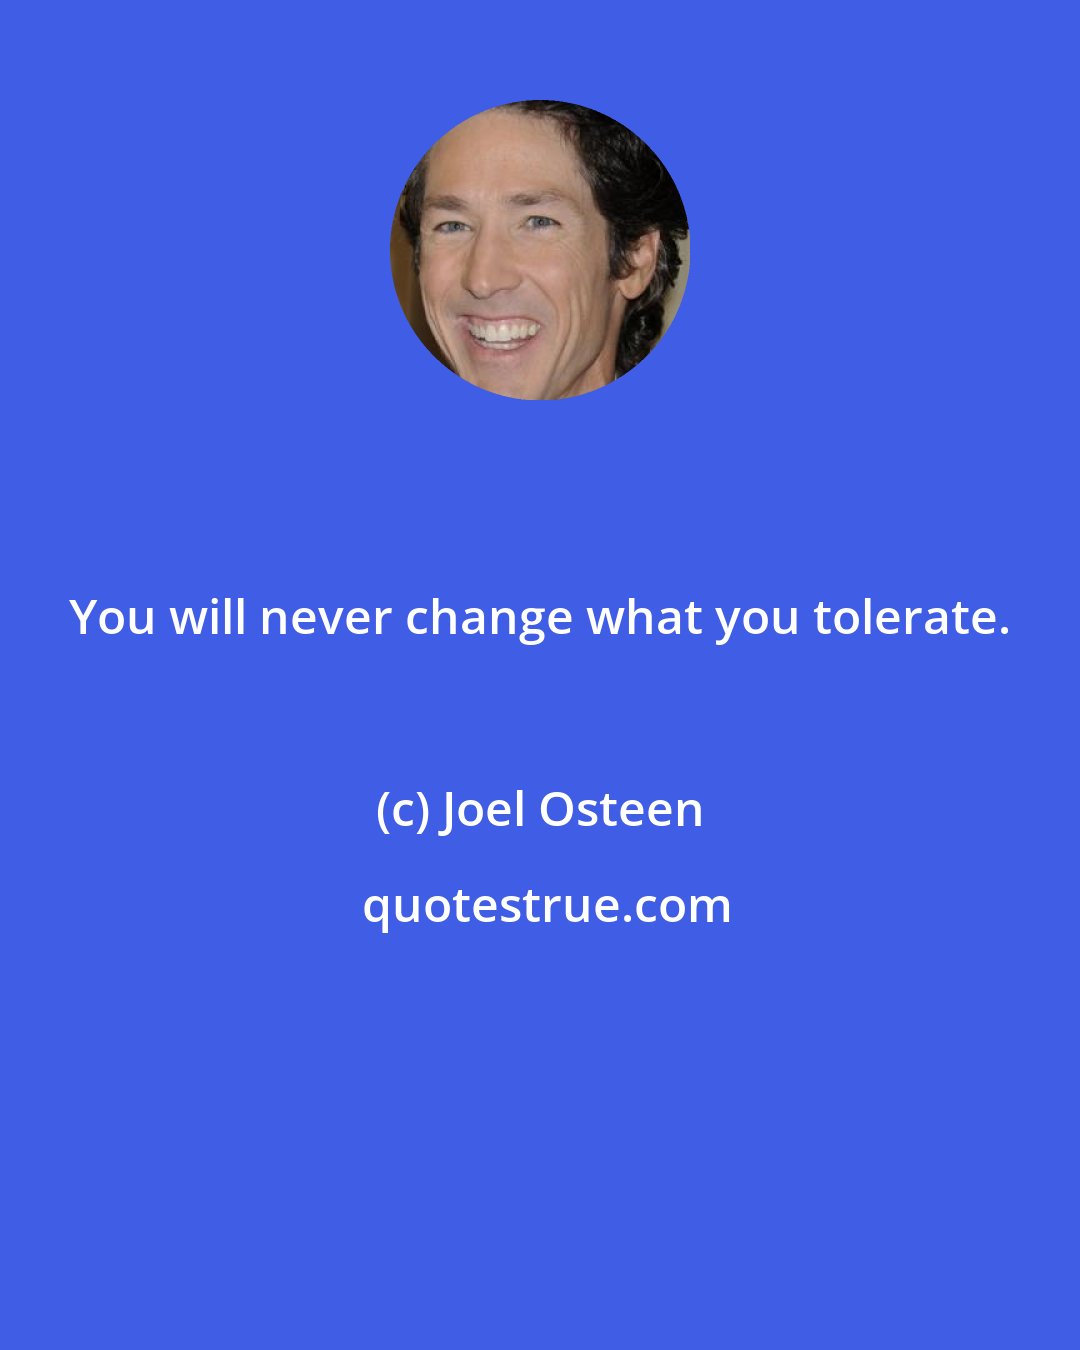 Joel Osteen: You will never change what you tolerate.